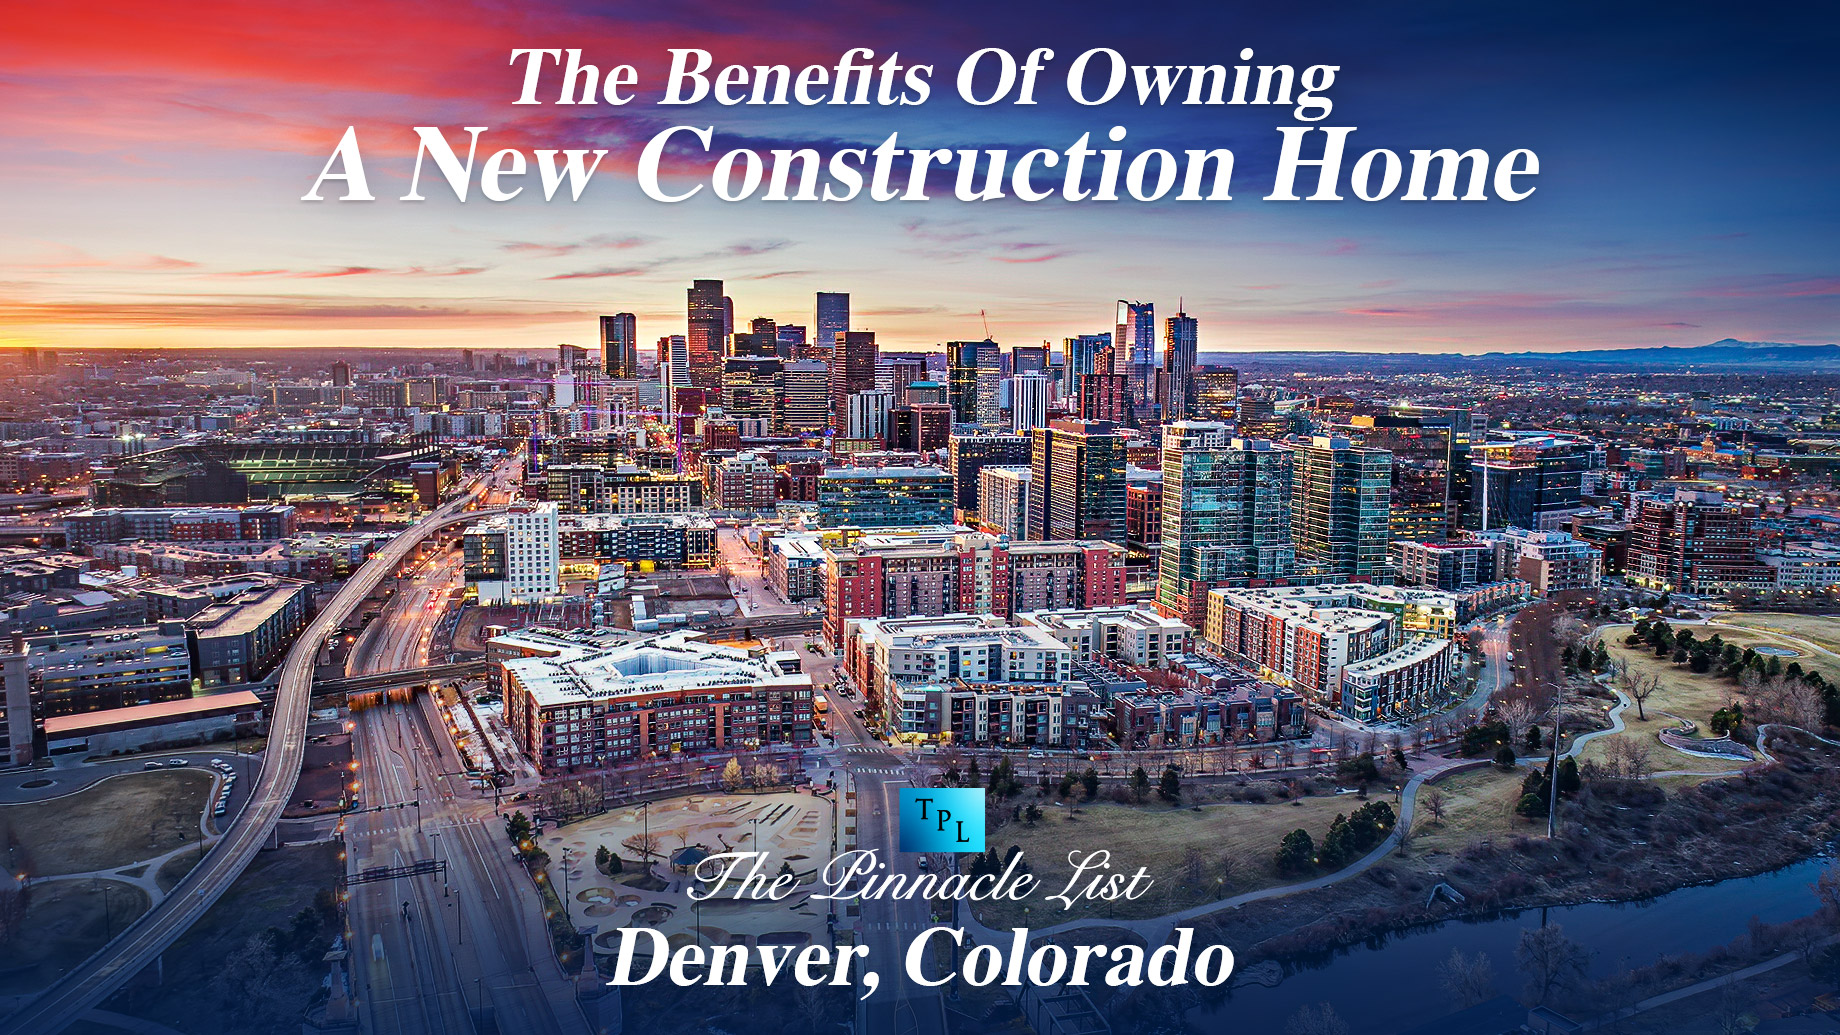 The Benefits Of Owning A New Construction Home In Denver